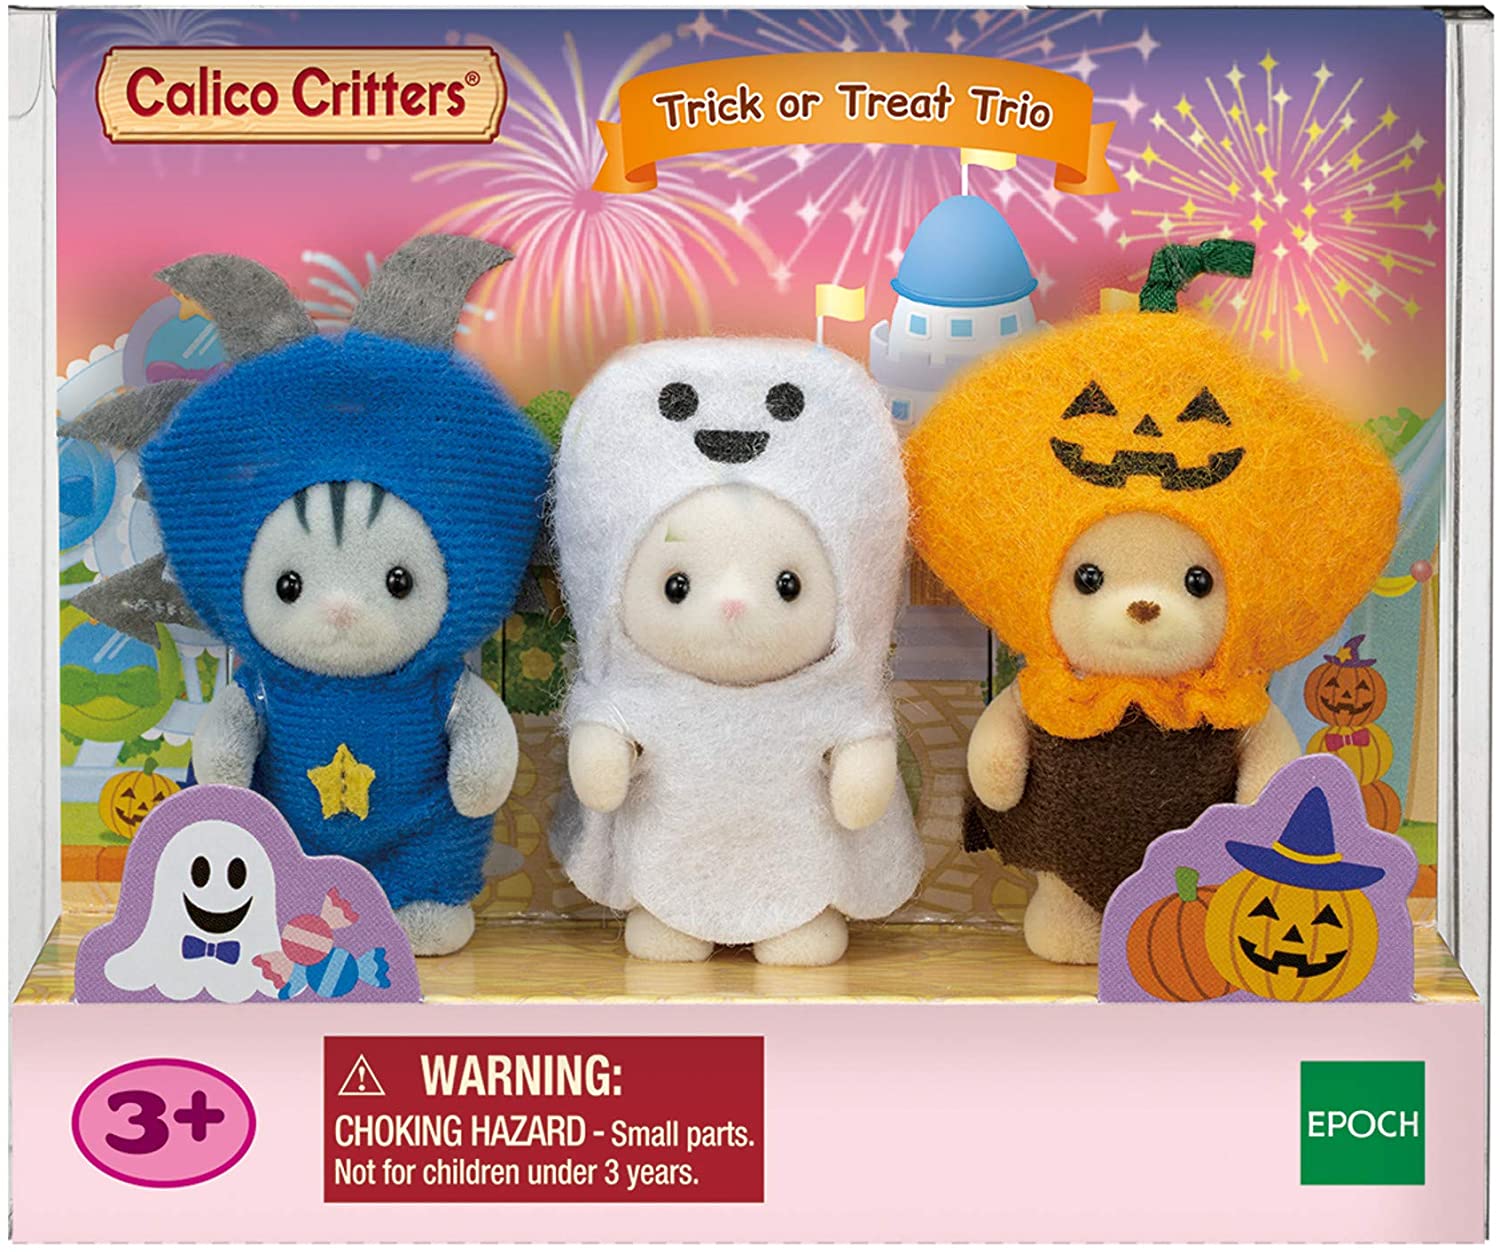 Details about   Sylvanian Families Calico Critters Baby Halloween Trio Set 